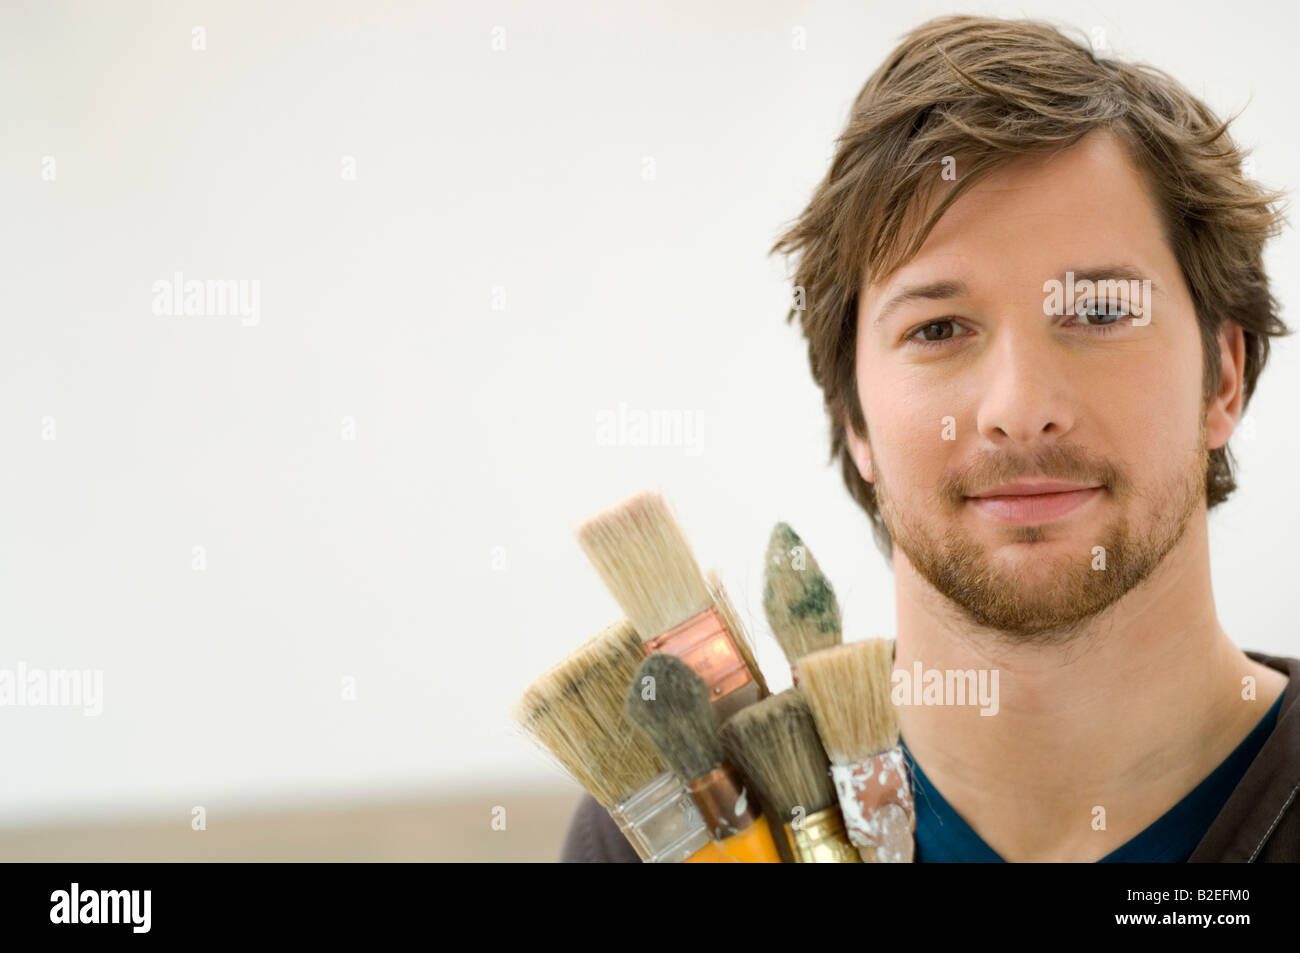 Portrait of a mid adult man holding paintbrushes Stock Photo